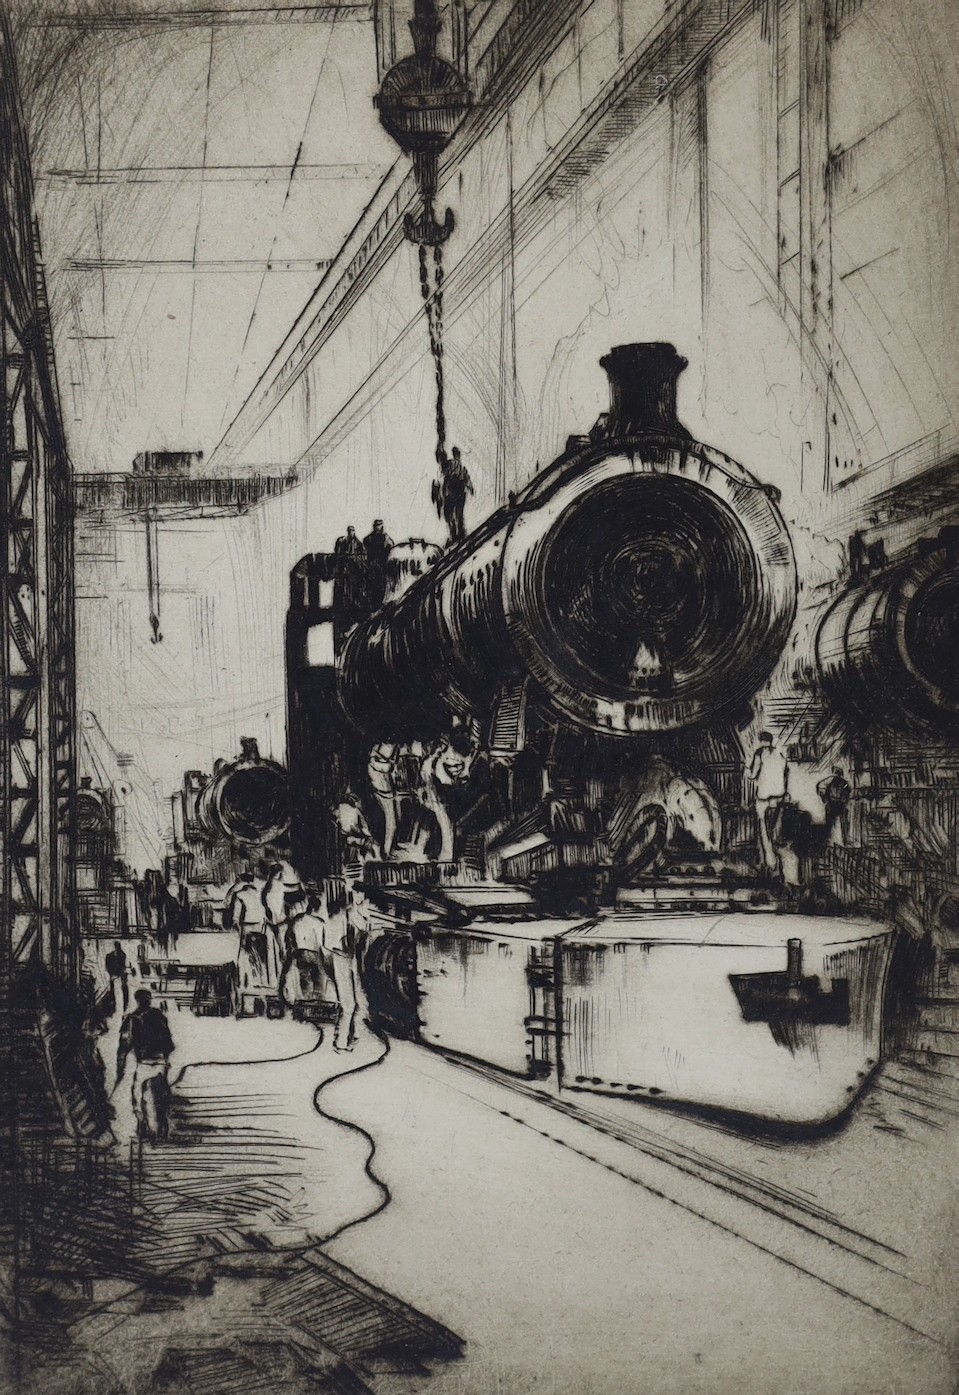 Frank Henry Mason (1876-1965), Impressions of the Works of William Beardmore and Company Ltd, Glasgow, folio of six etchings, all signed in pencil, 25 x 18cm, folio overall 46 x 37cm